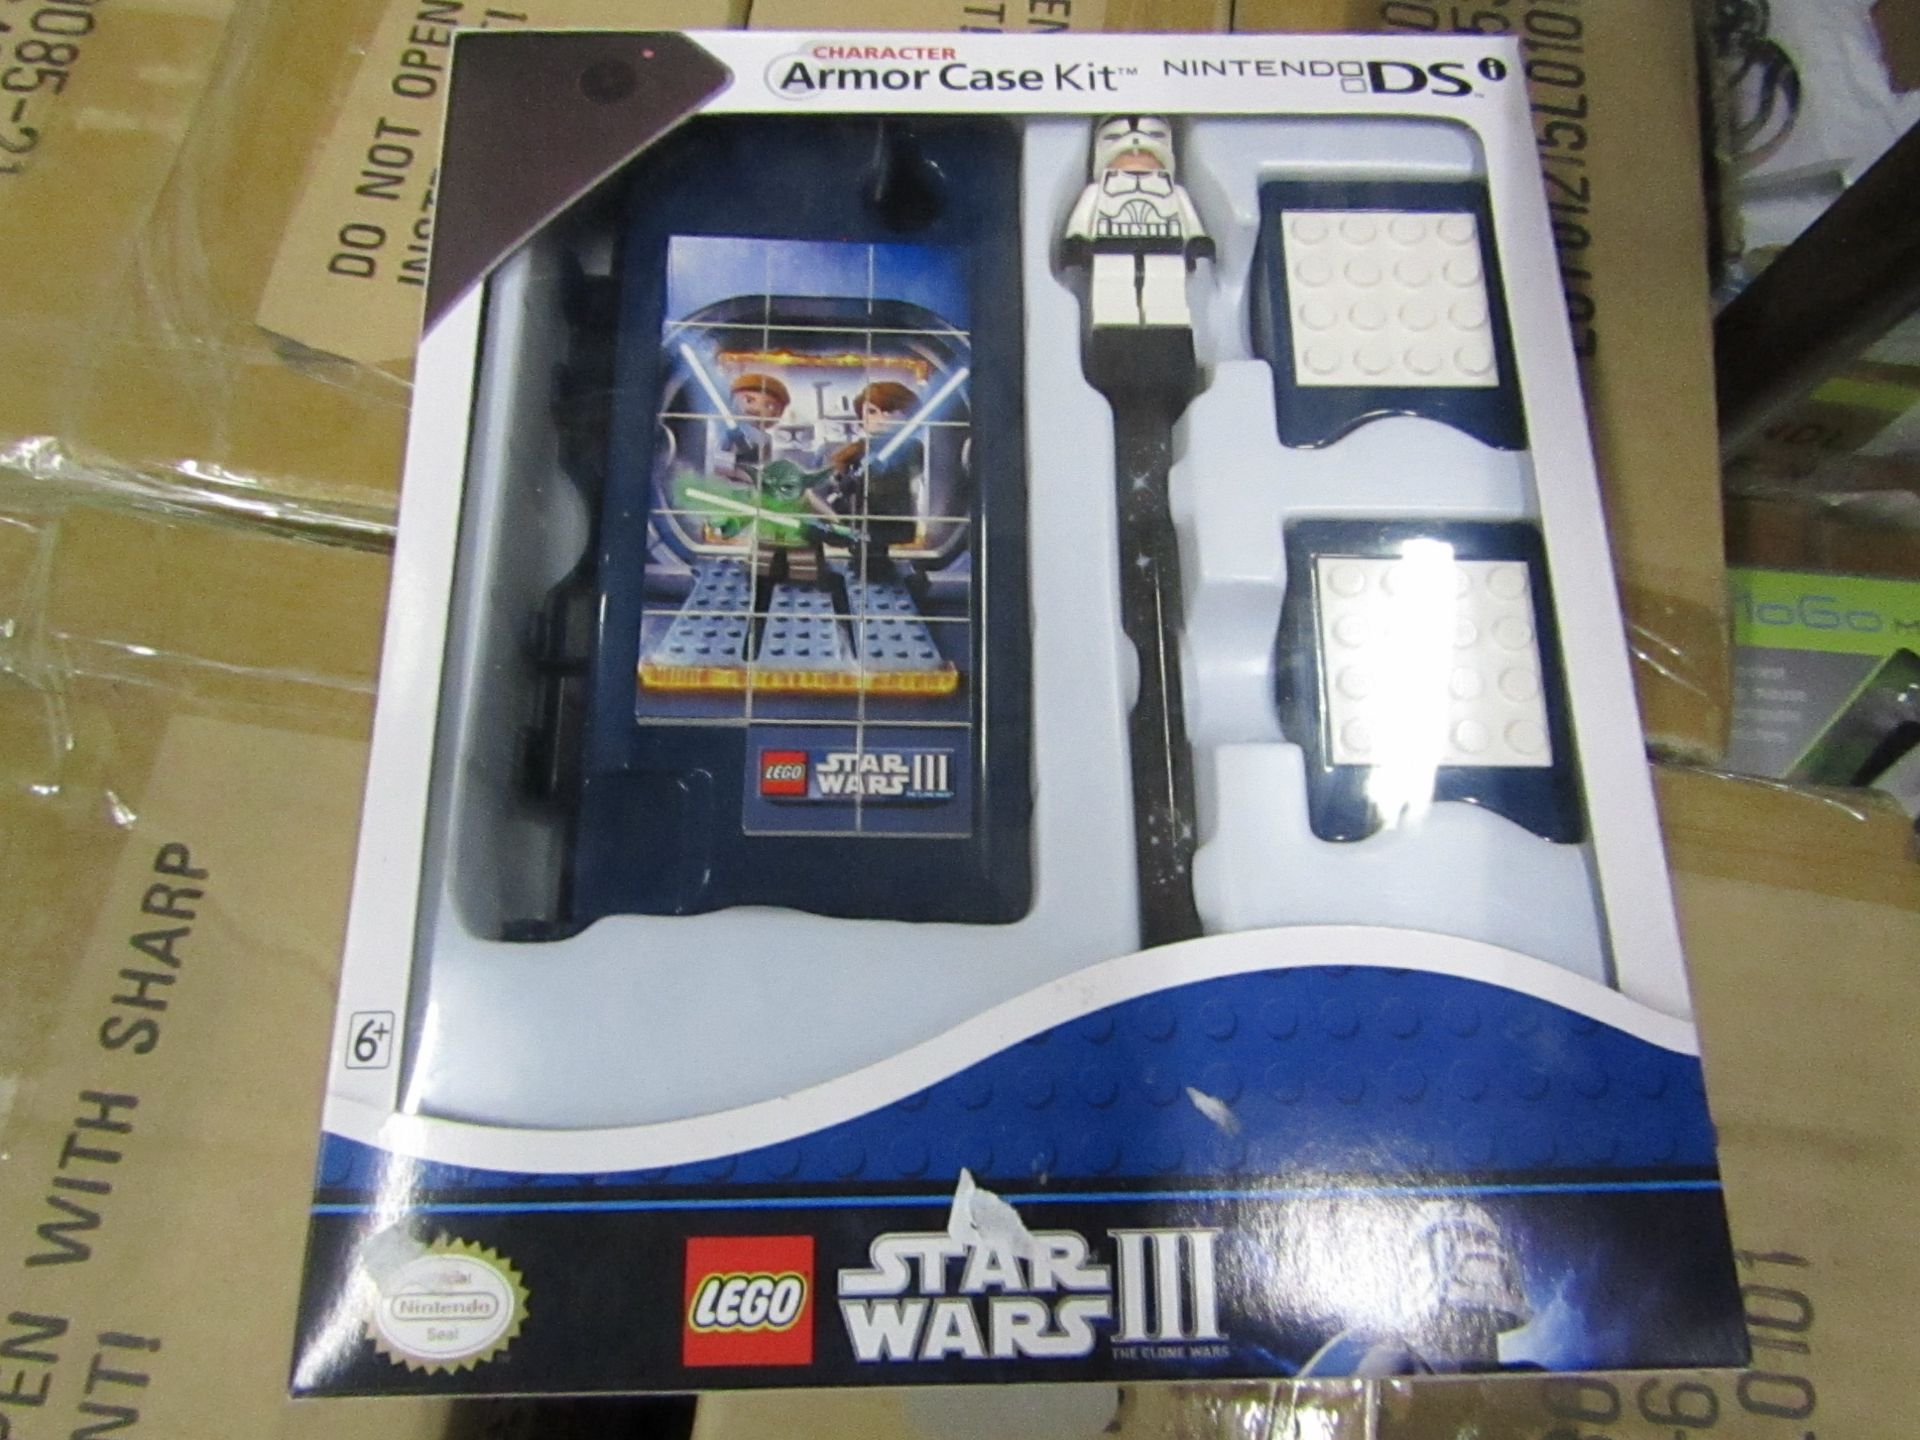 4x NINTENDO DS - Lego StarWars Armor case kit, all boxed and packaged.